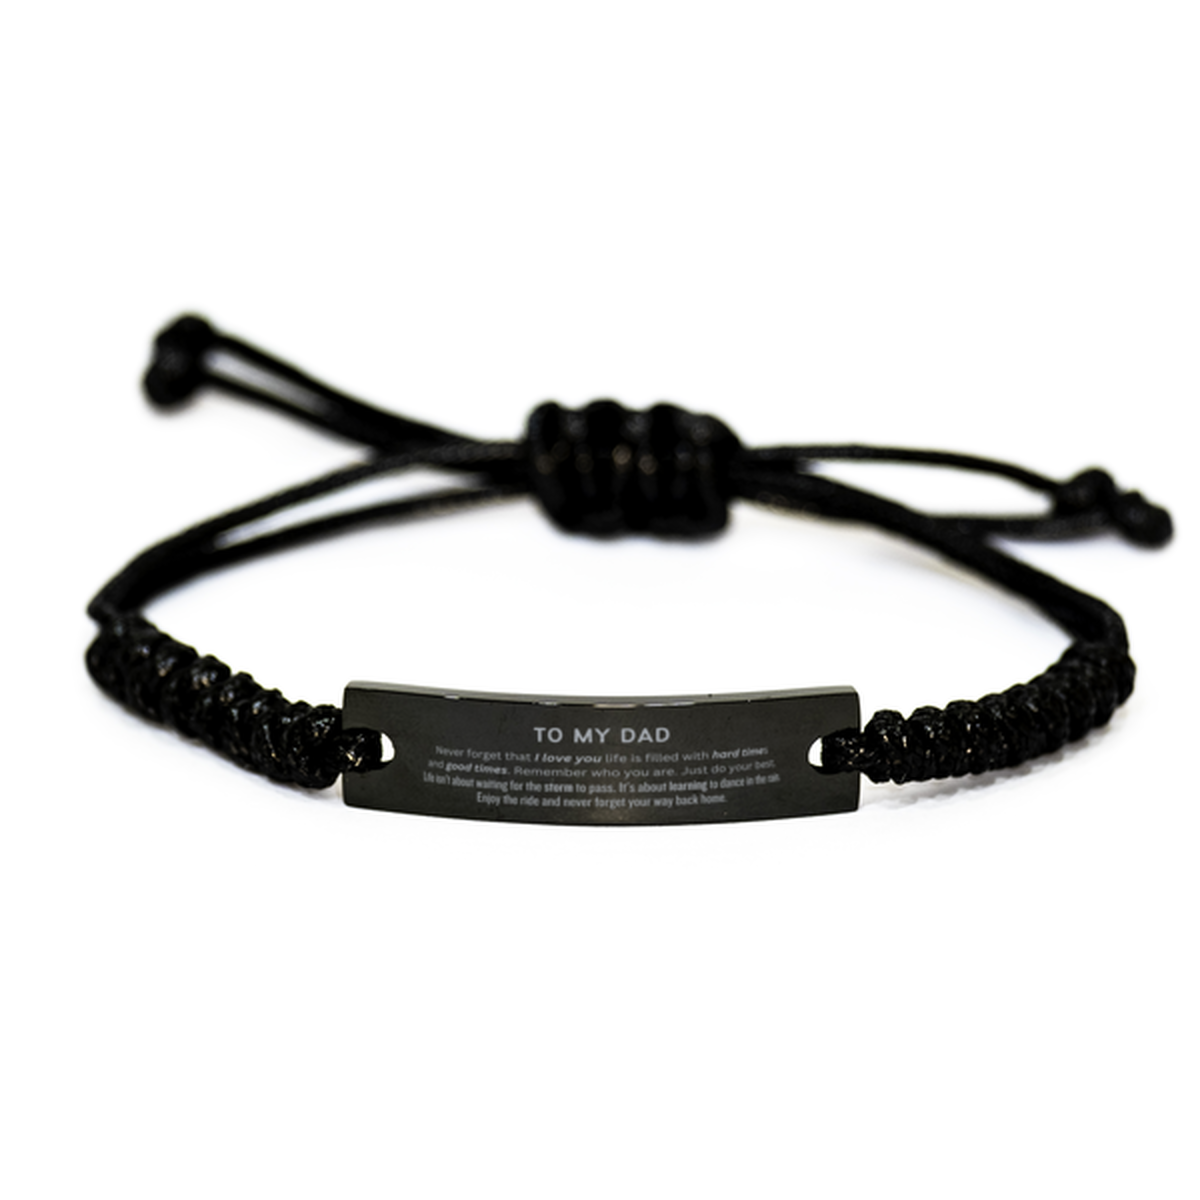 Christmas Dad Black Rope Bracelet Gifts, To My Dad Birthday Thank You Gifts For Dad, Graduation Unique Gifts For Dad To My Dad Never forget that I love you life is filled with hard times and good times. Remember who you are. Just do your best